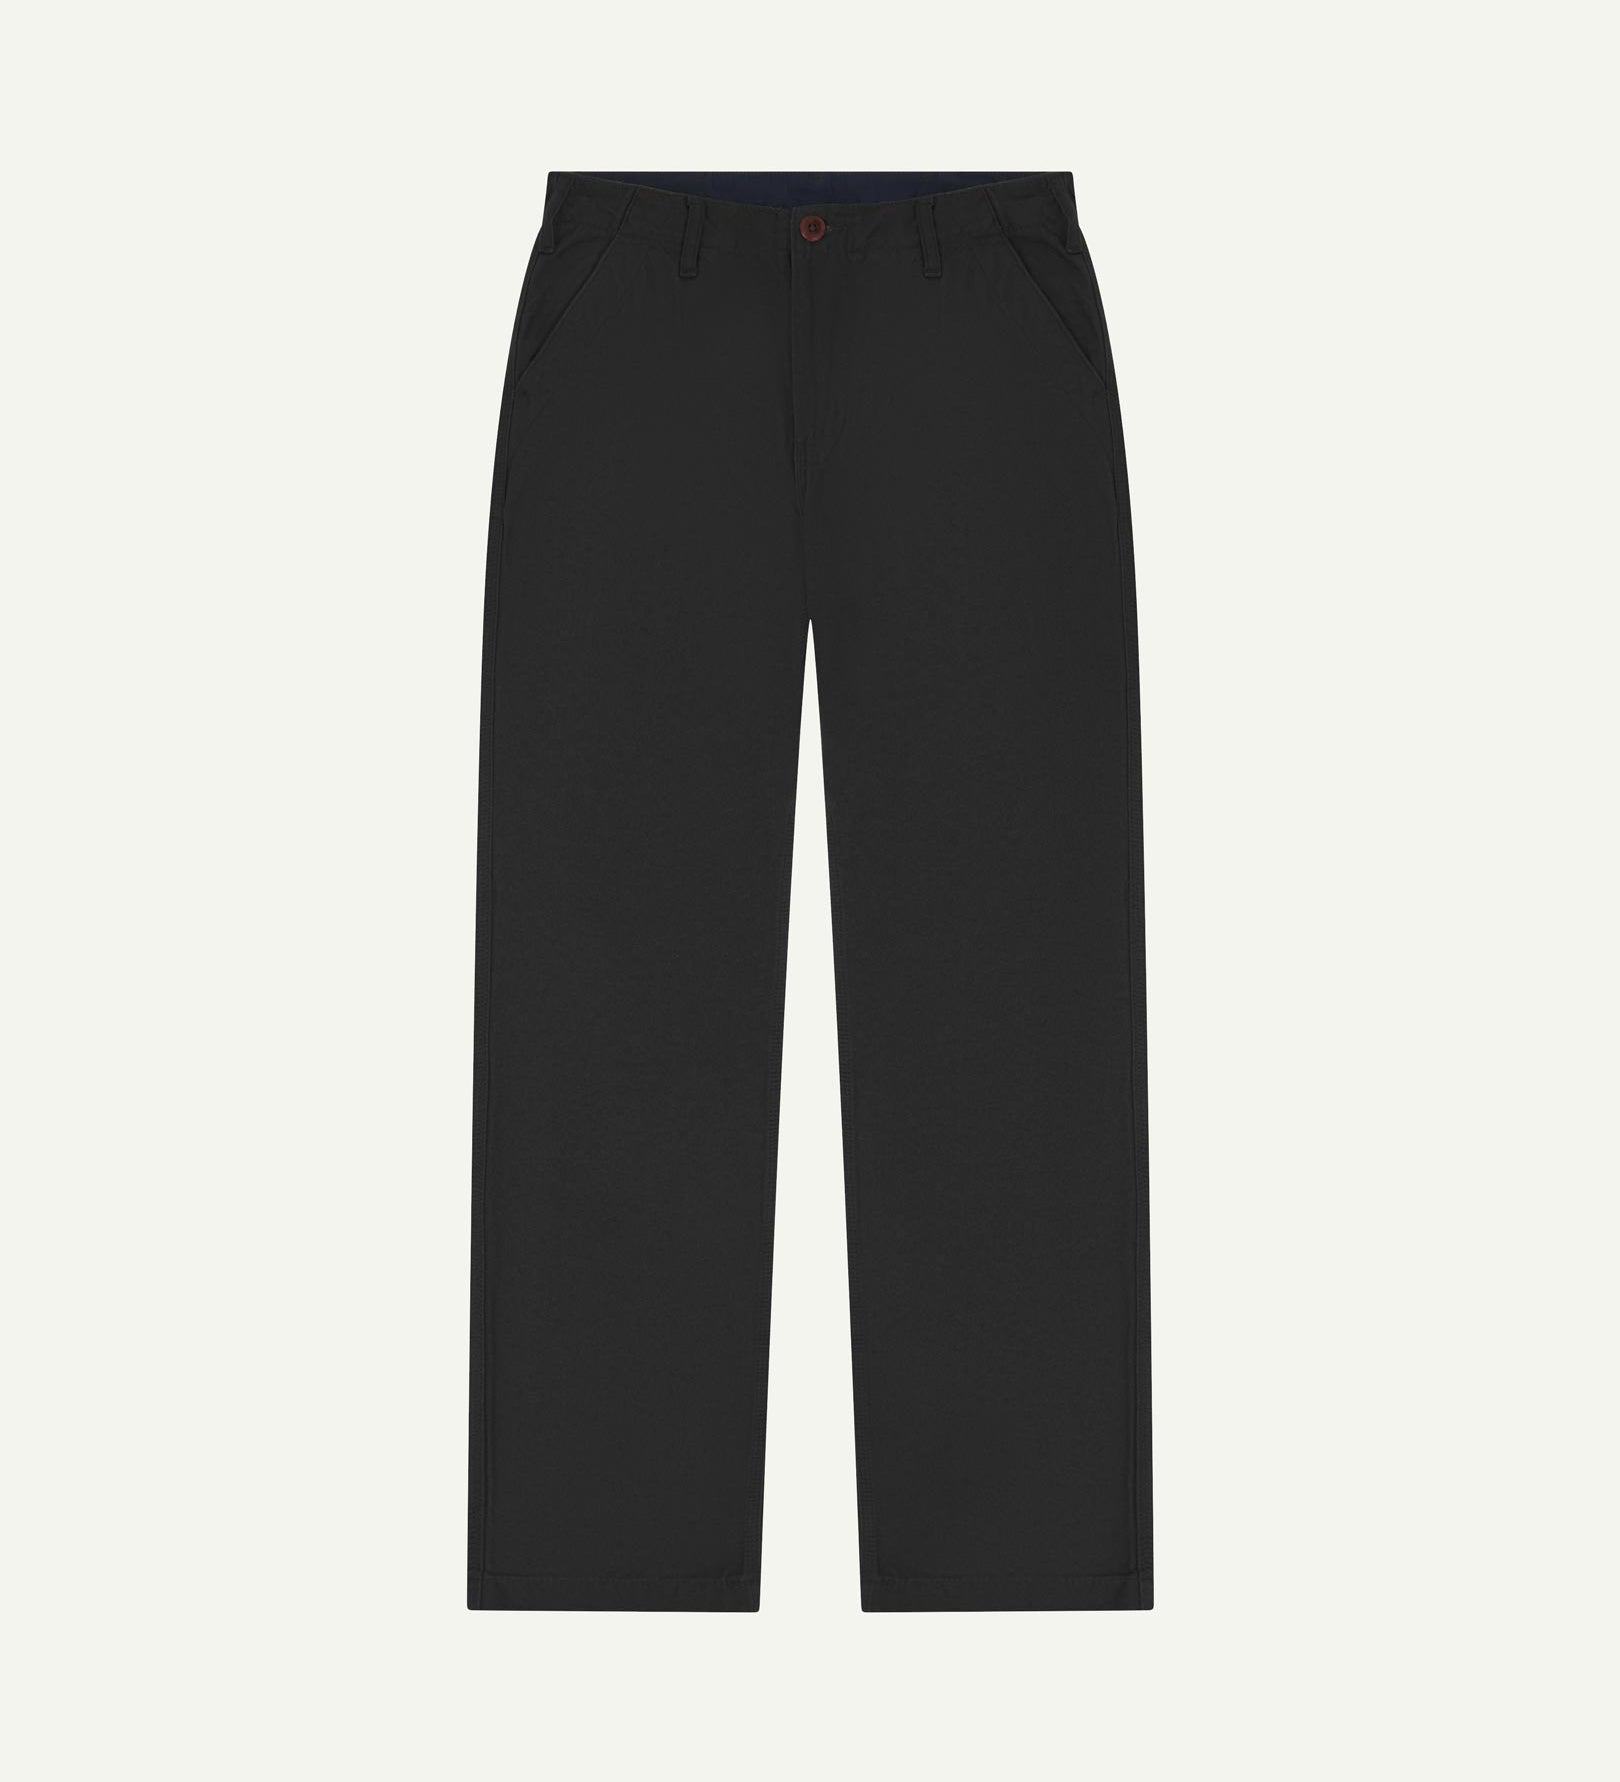 Front flat view of 5005 Uskees men's organic cotton black casual trousers with view of YKK zip fly and Corozo buttons.